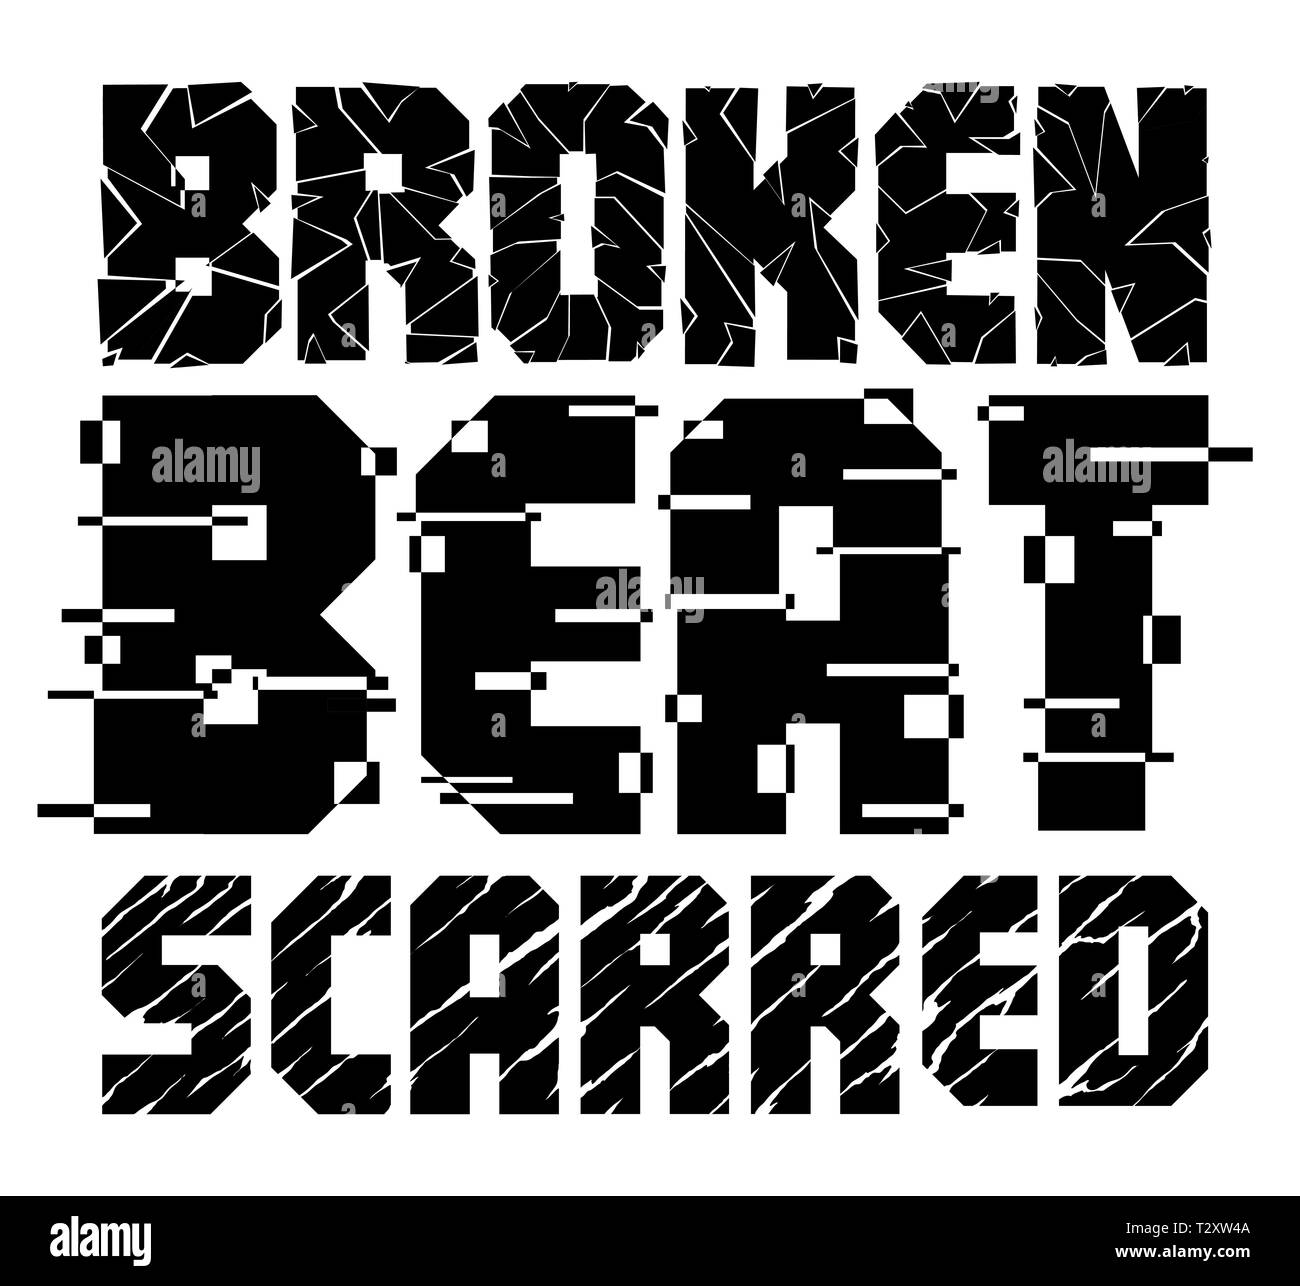 Broken Beat Scarred lettering design.  Grunge,  distressed and cut out design illustration for web, t-shirt design, other graphic design use Stock Vector